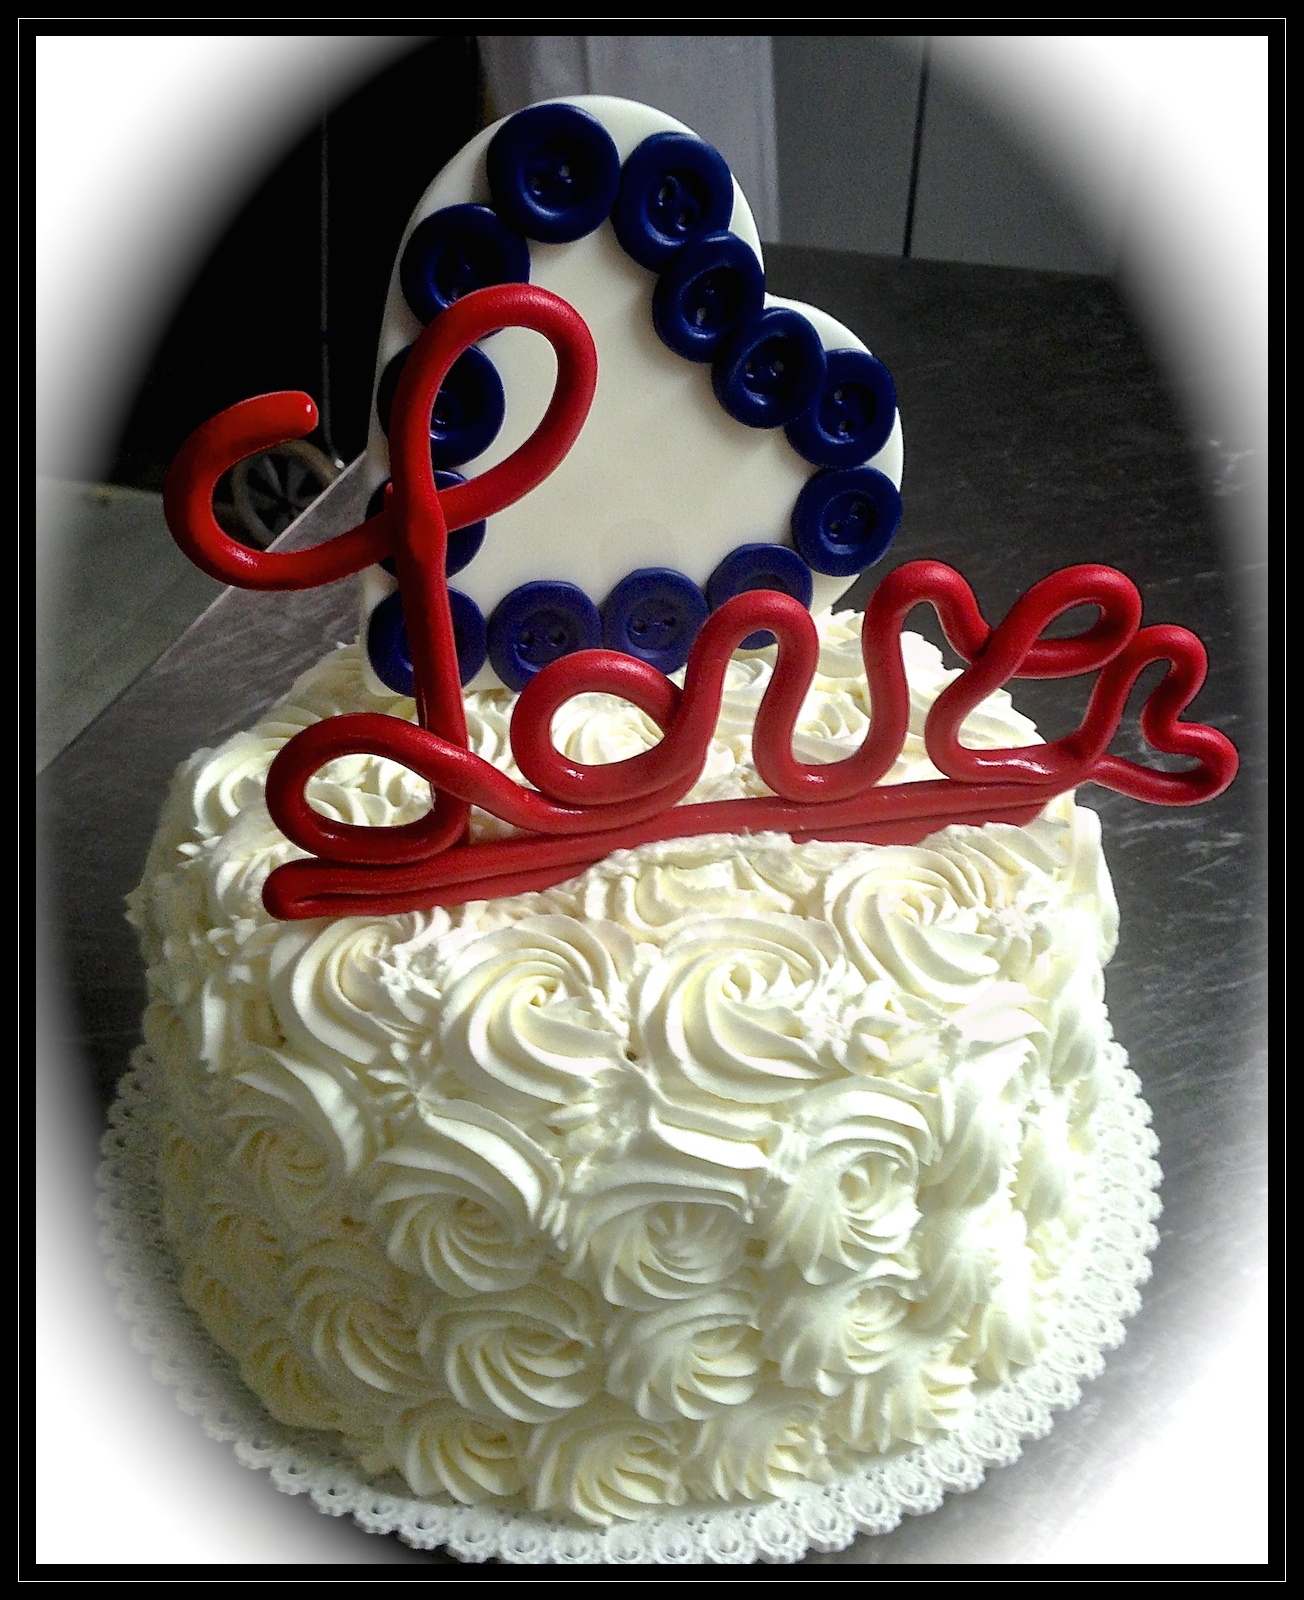 Weddingcake: " Love and buttons on the union jack "